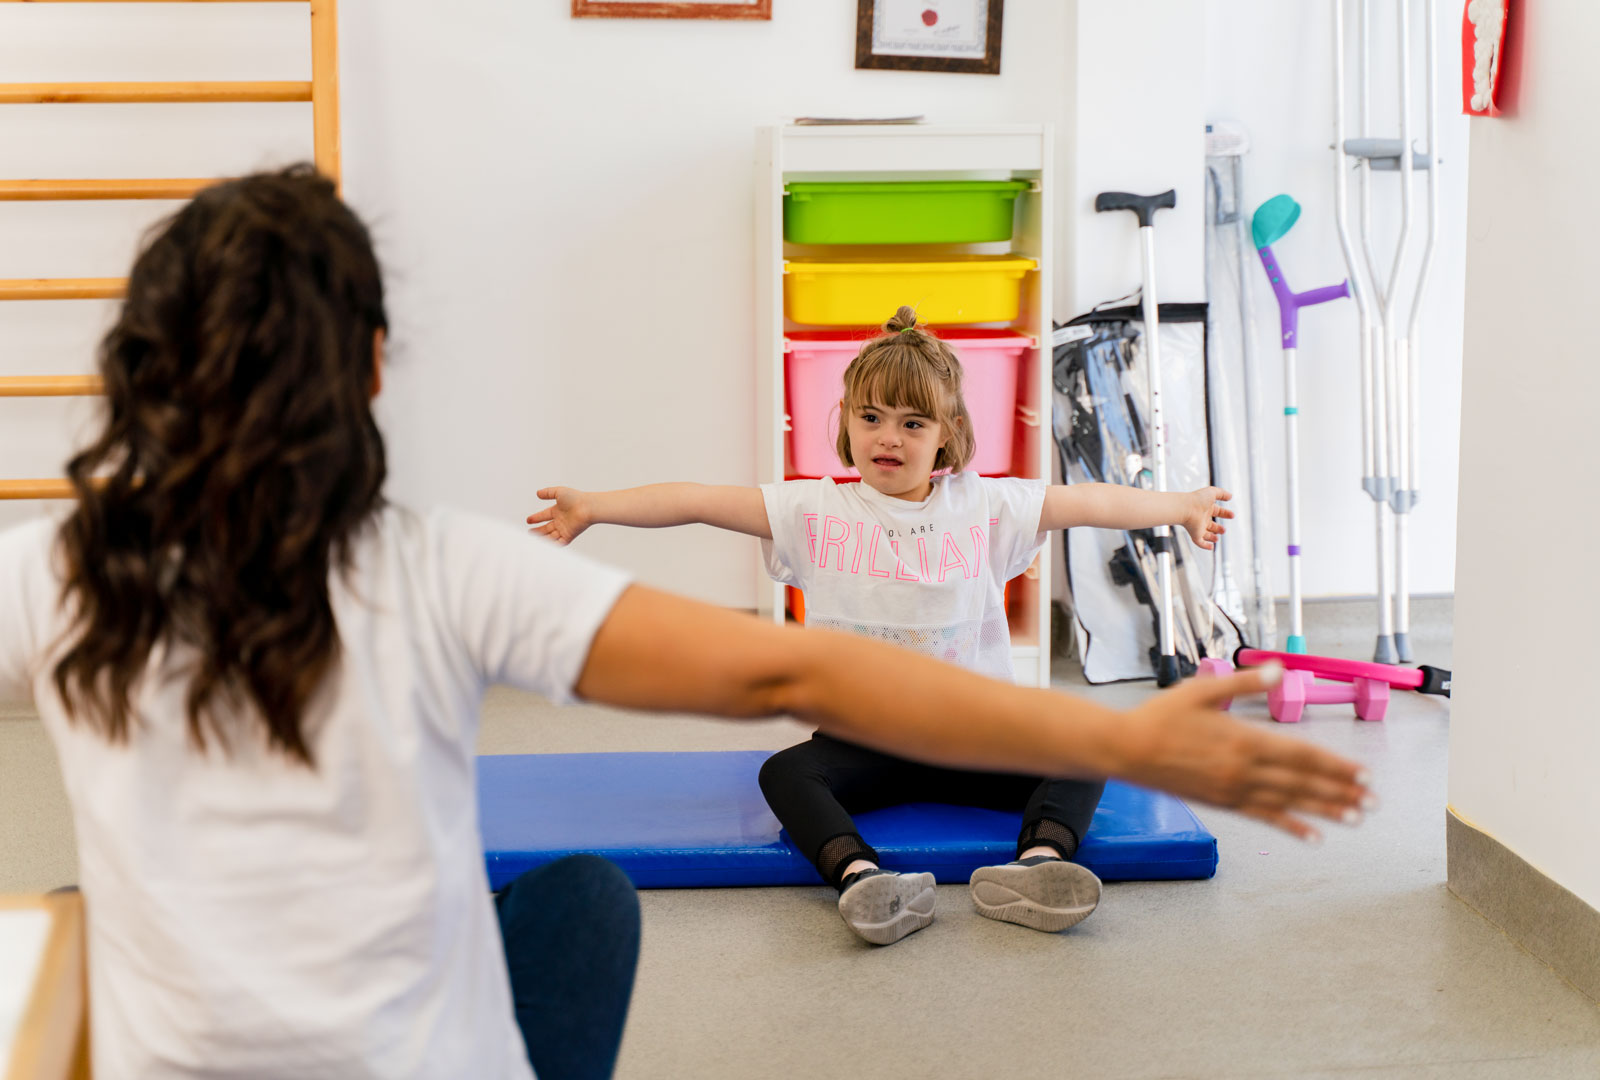 Provider with their back turned to us, leading arm exercises with seated child